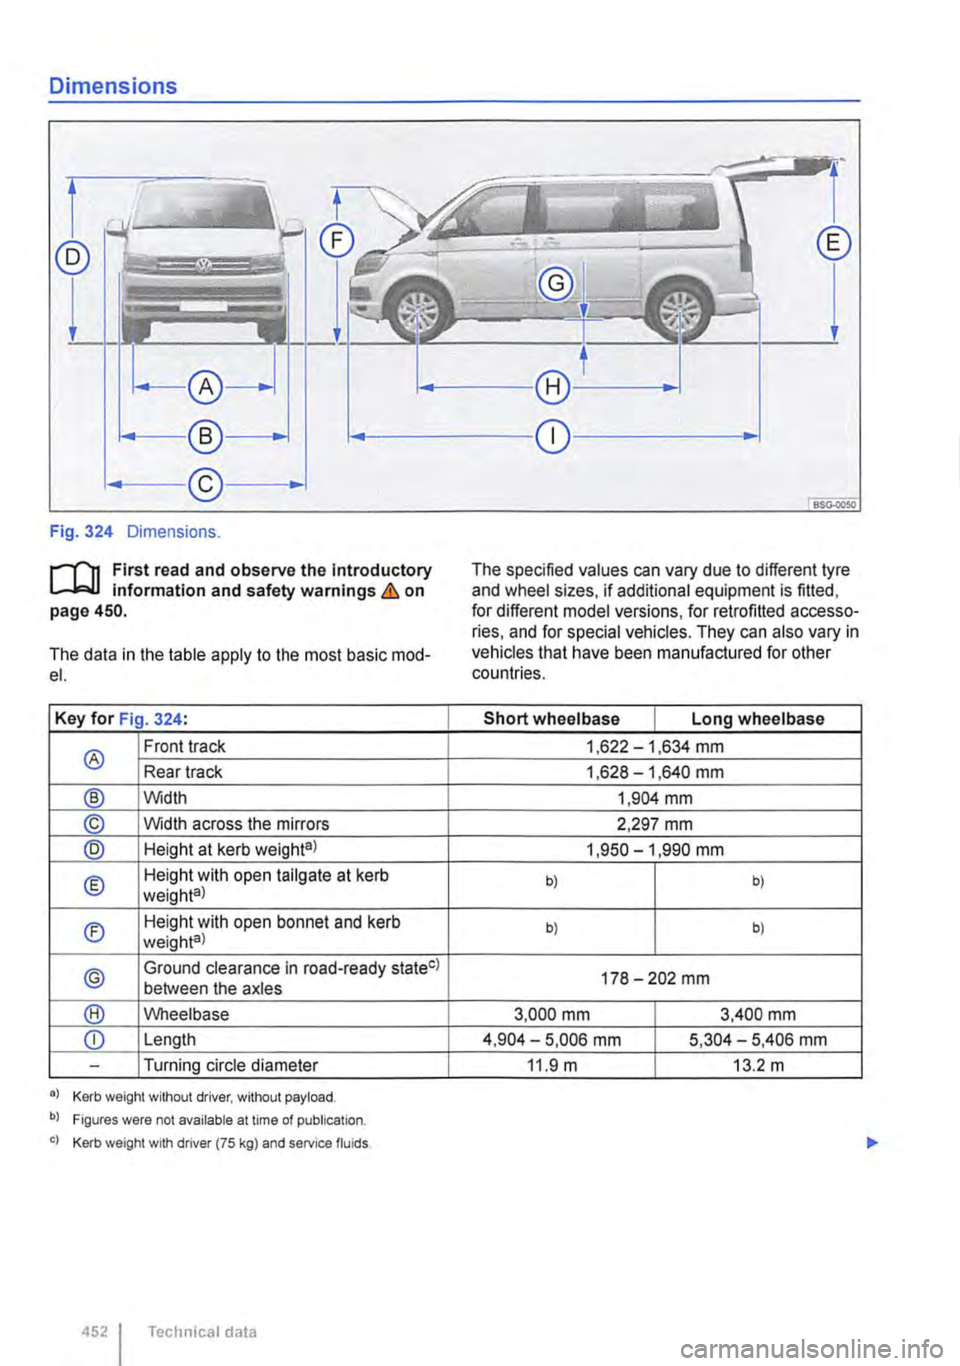 VOLKSWAGEN TRANSPORTER 2013  Owners Manual Dimensions 
Fig. 324 Dimensions. 
l""""(n First read and observe the introductory L-J,.:.U information and safety warnings & on page 450. 
The data in the table apply to the most basic mod-el. 
Key 